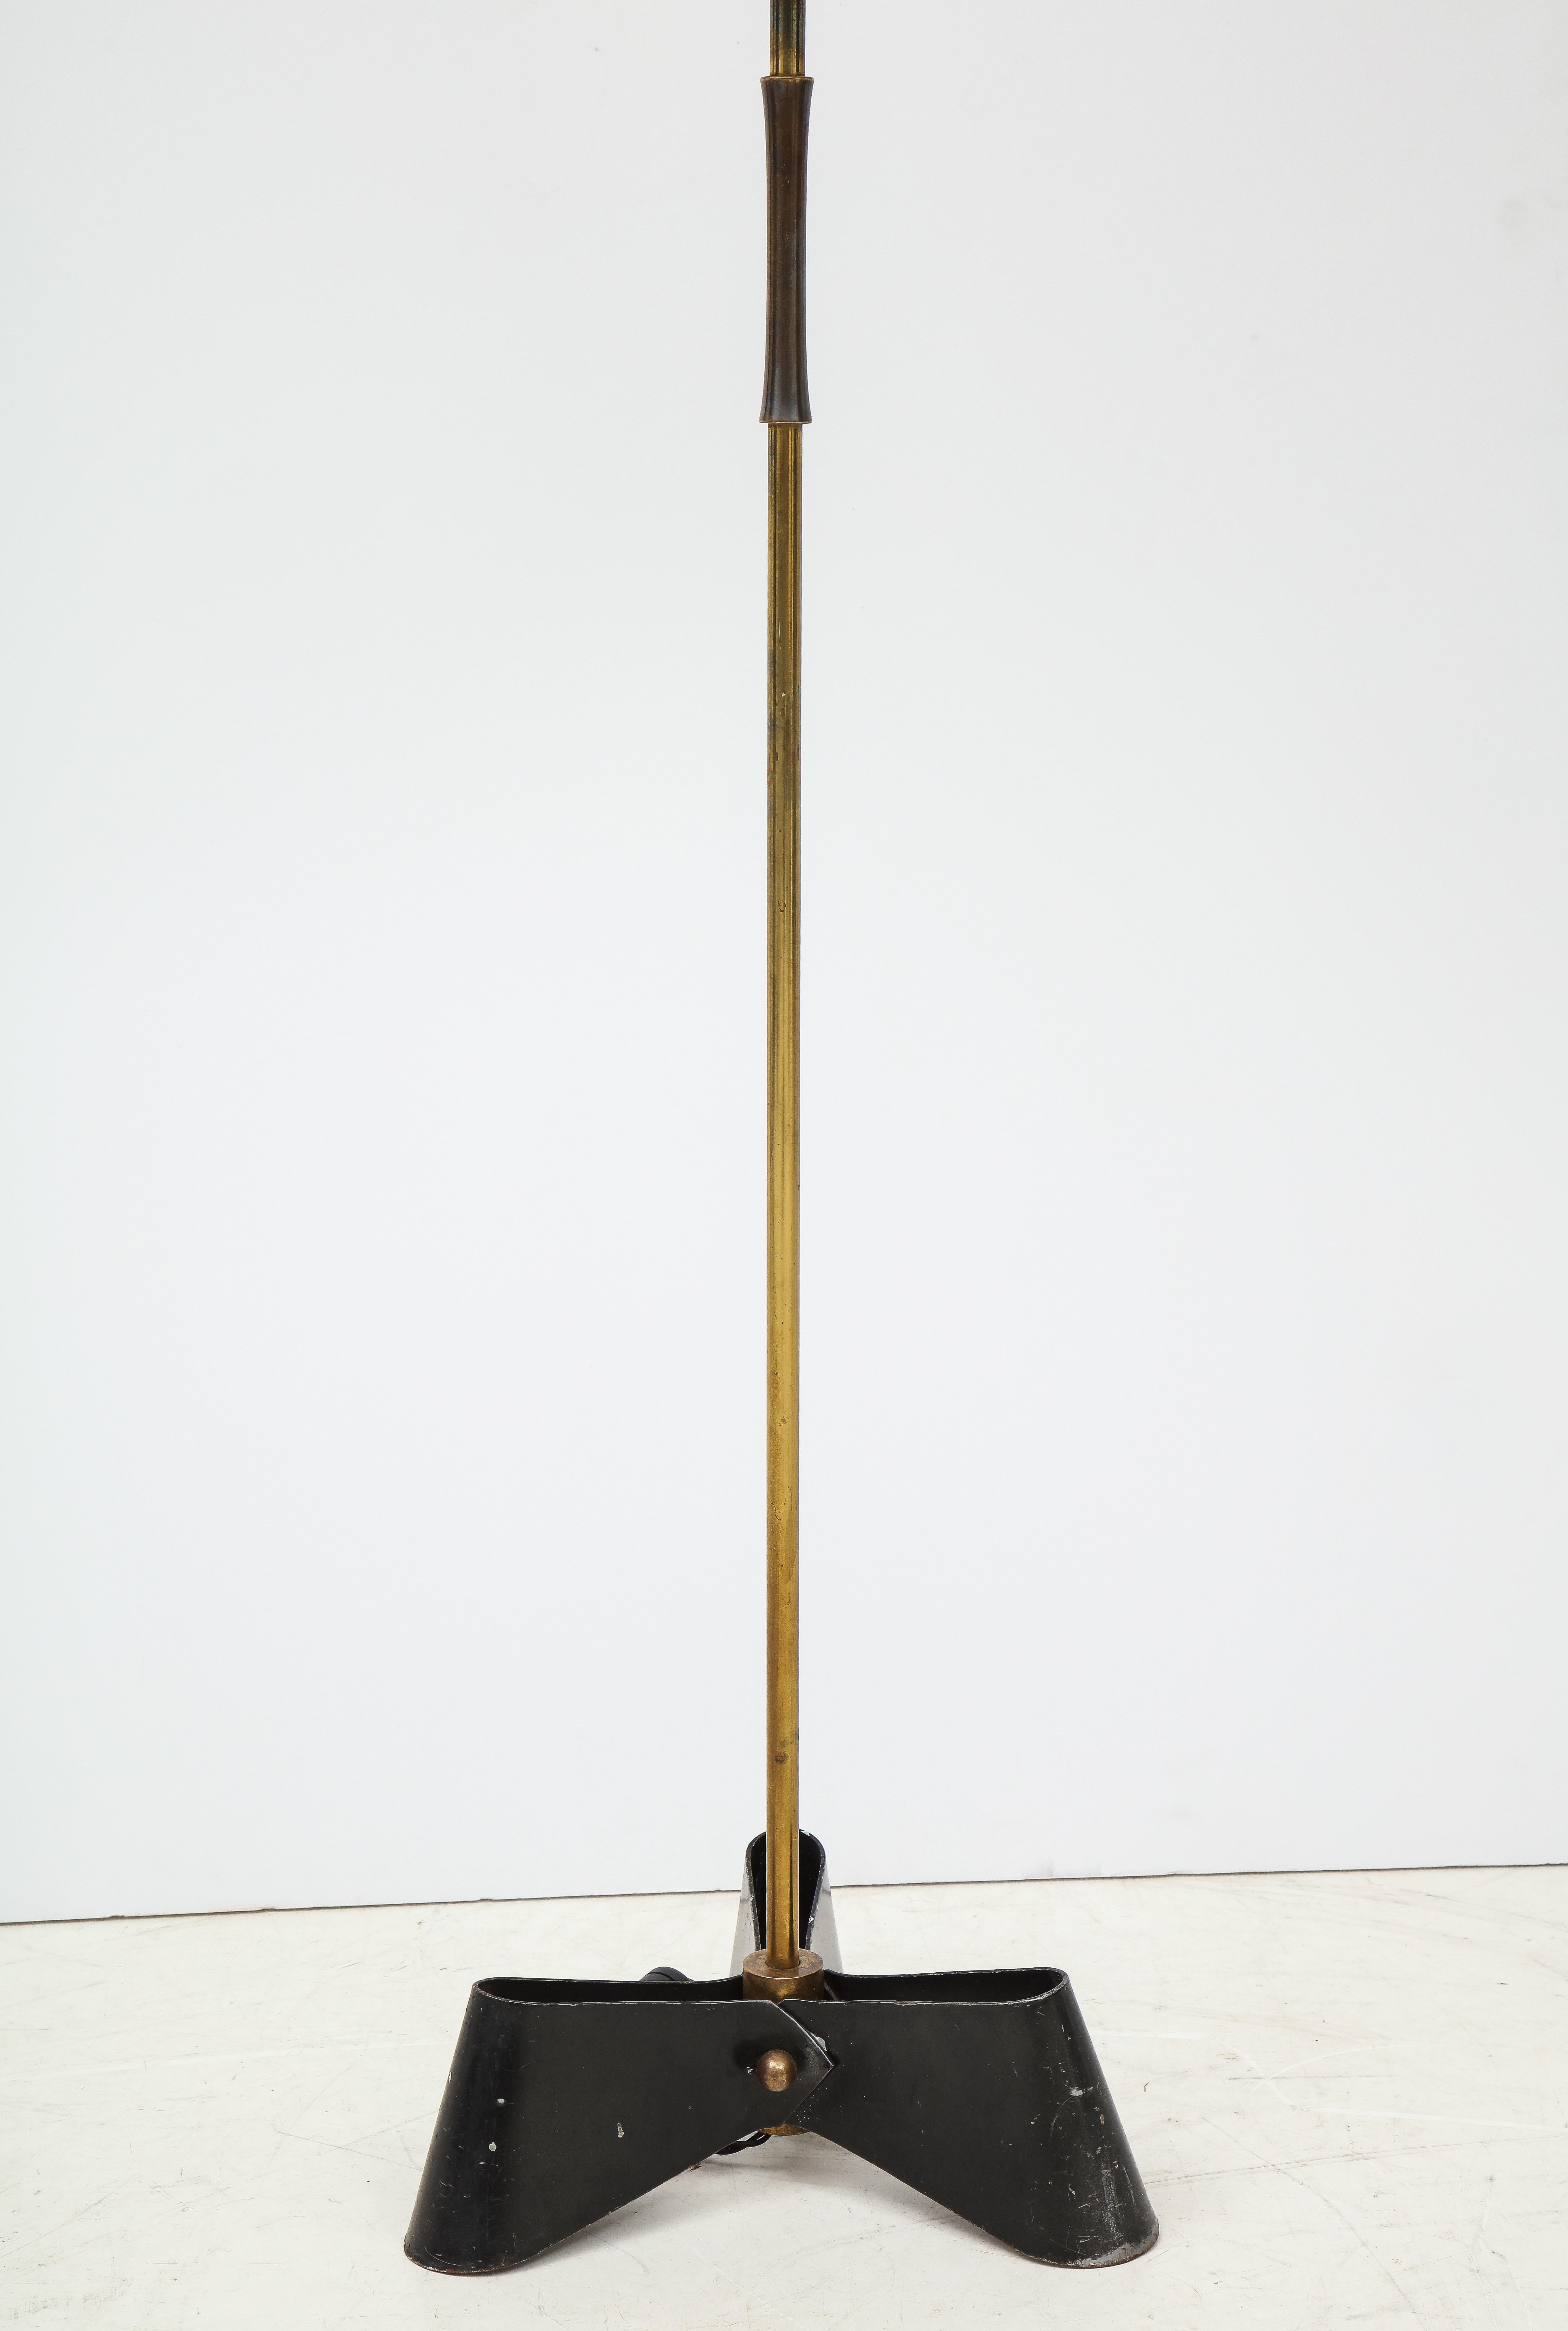 Outstanding Bronze and Wrought Iron Floor Lamp, 1950s For Sale 3